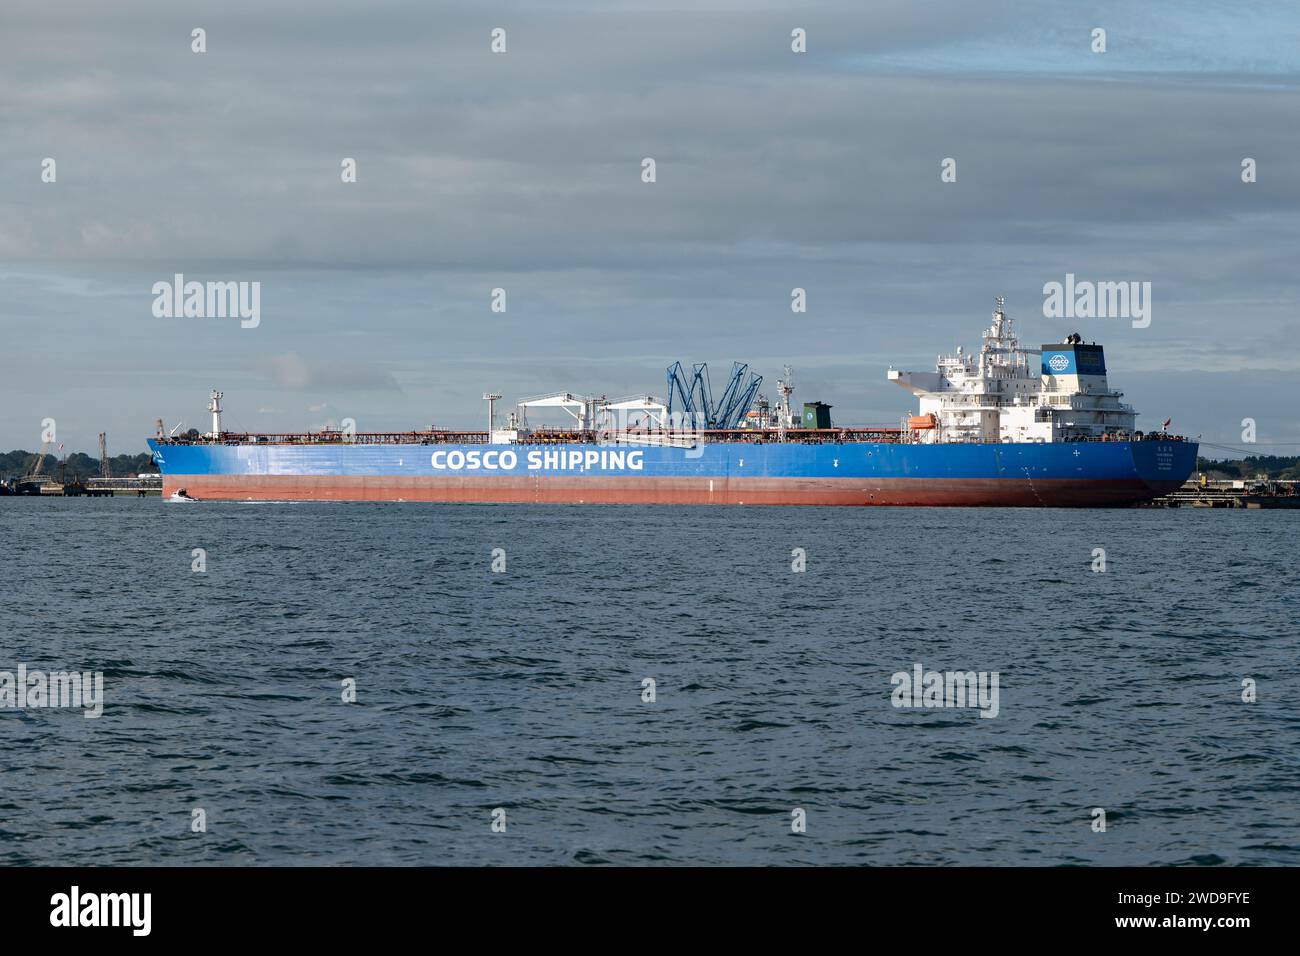 Chinese Oil Products Tanker Yuan Dong Hai of the Cosco Shipping Line moored at the Fawley Refinery in Southampton Water on the South coast of England Stock Photo